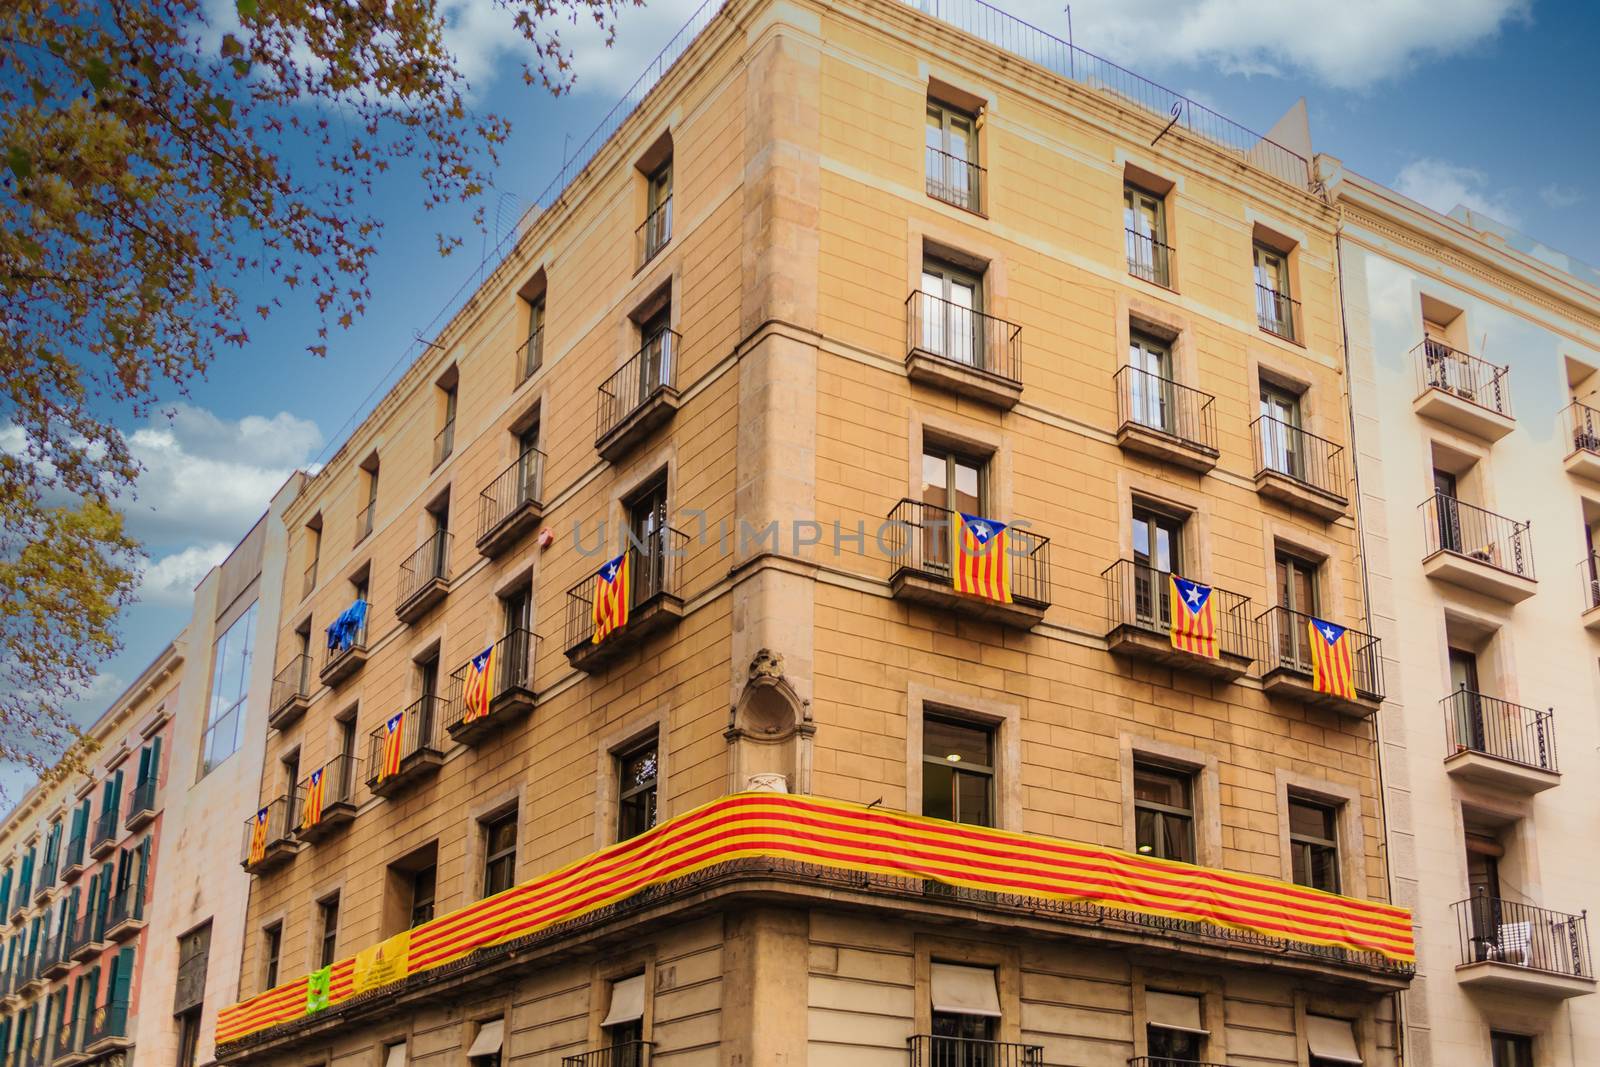 Flags and Banner Supporting Catalana Independence by dbvirago